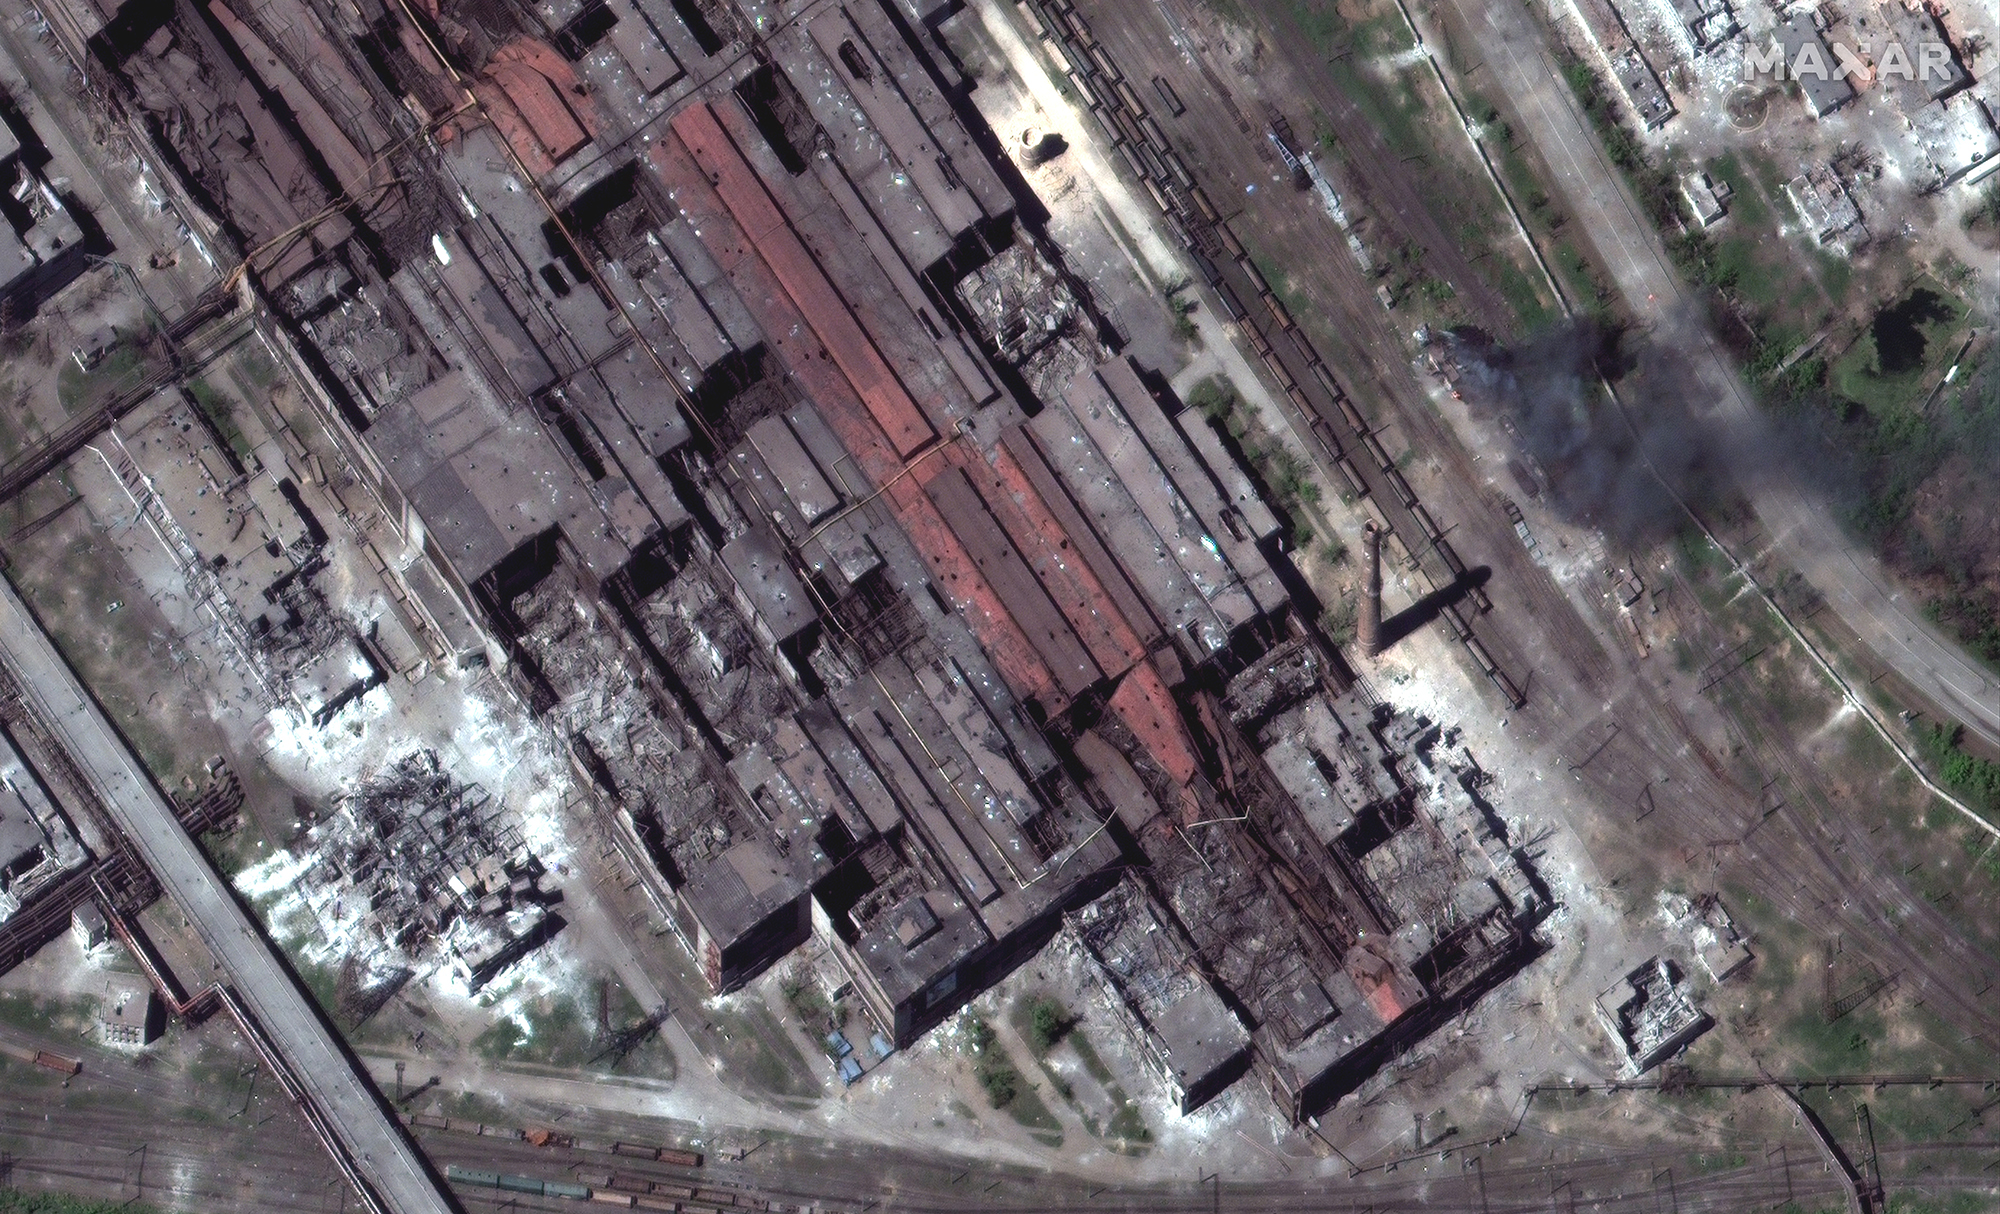 A satellite view of the damage to the eastern end of the Azovstal steel plant in Mariupol, Ukraine, on May 12.